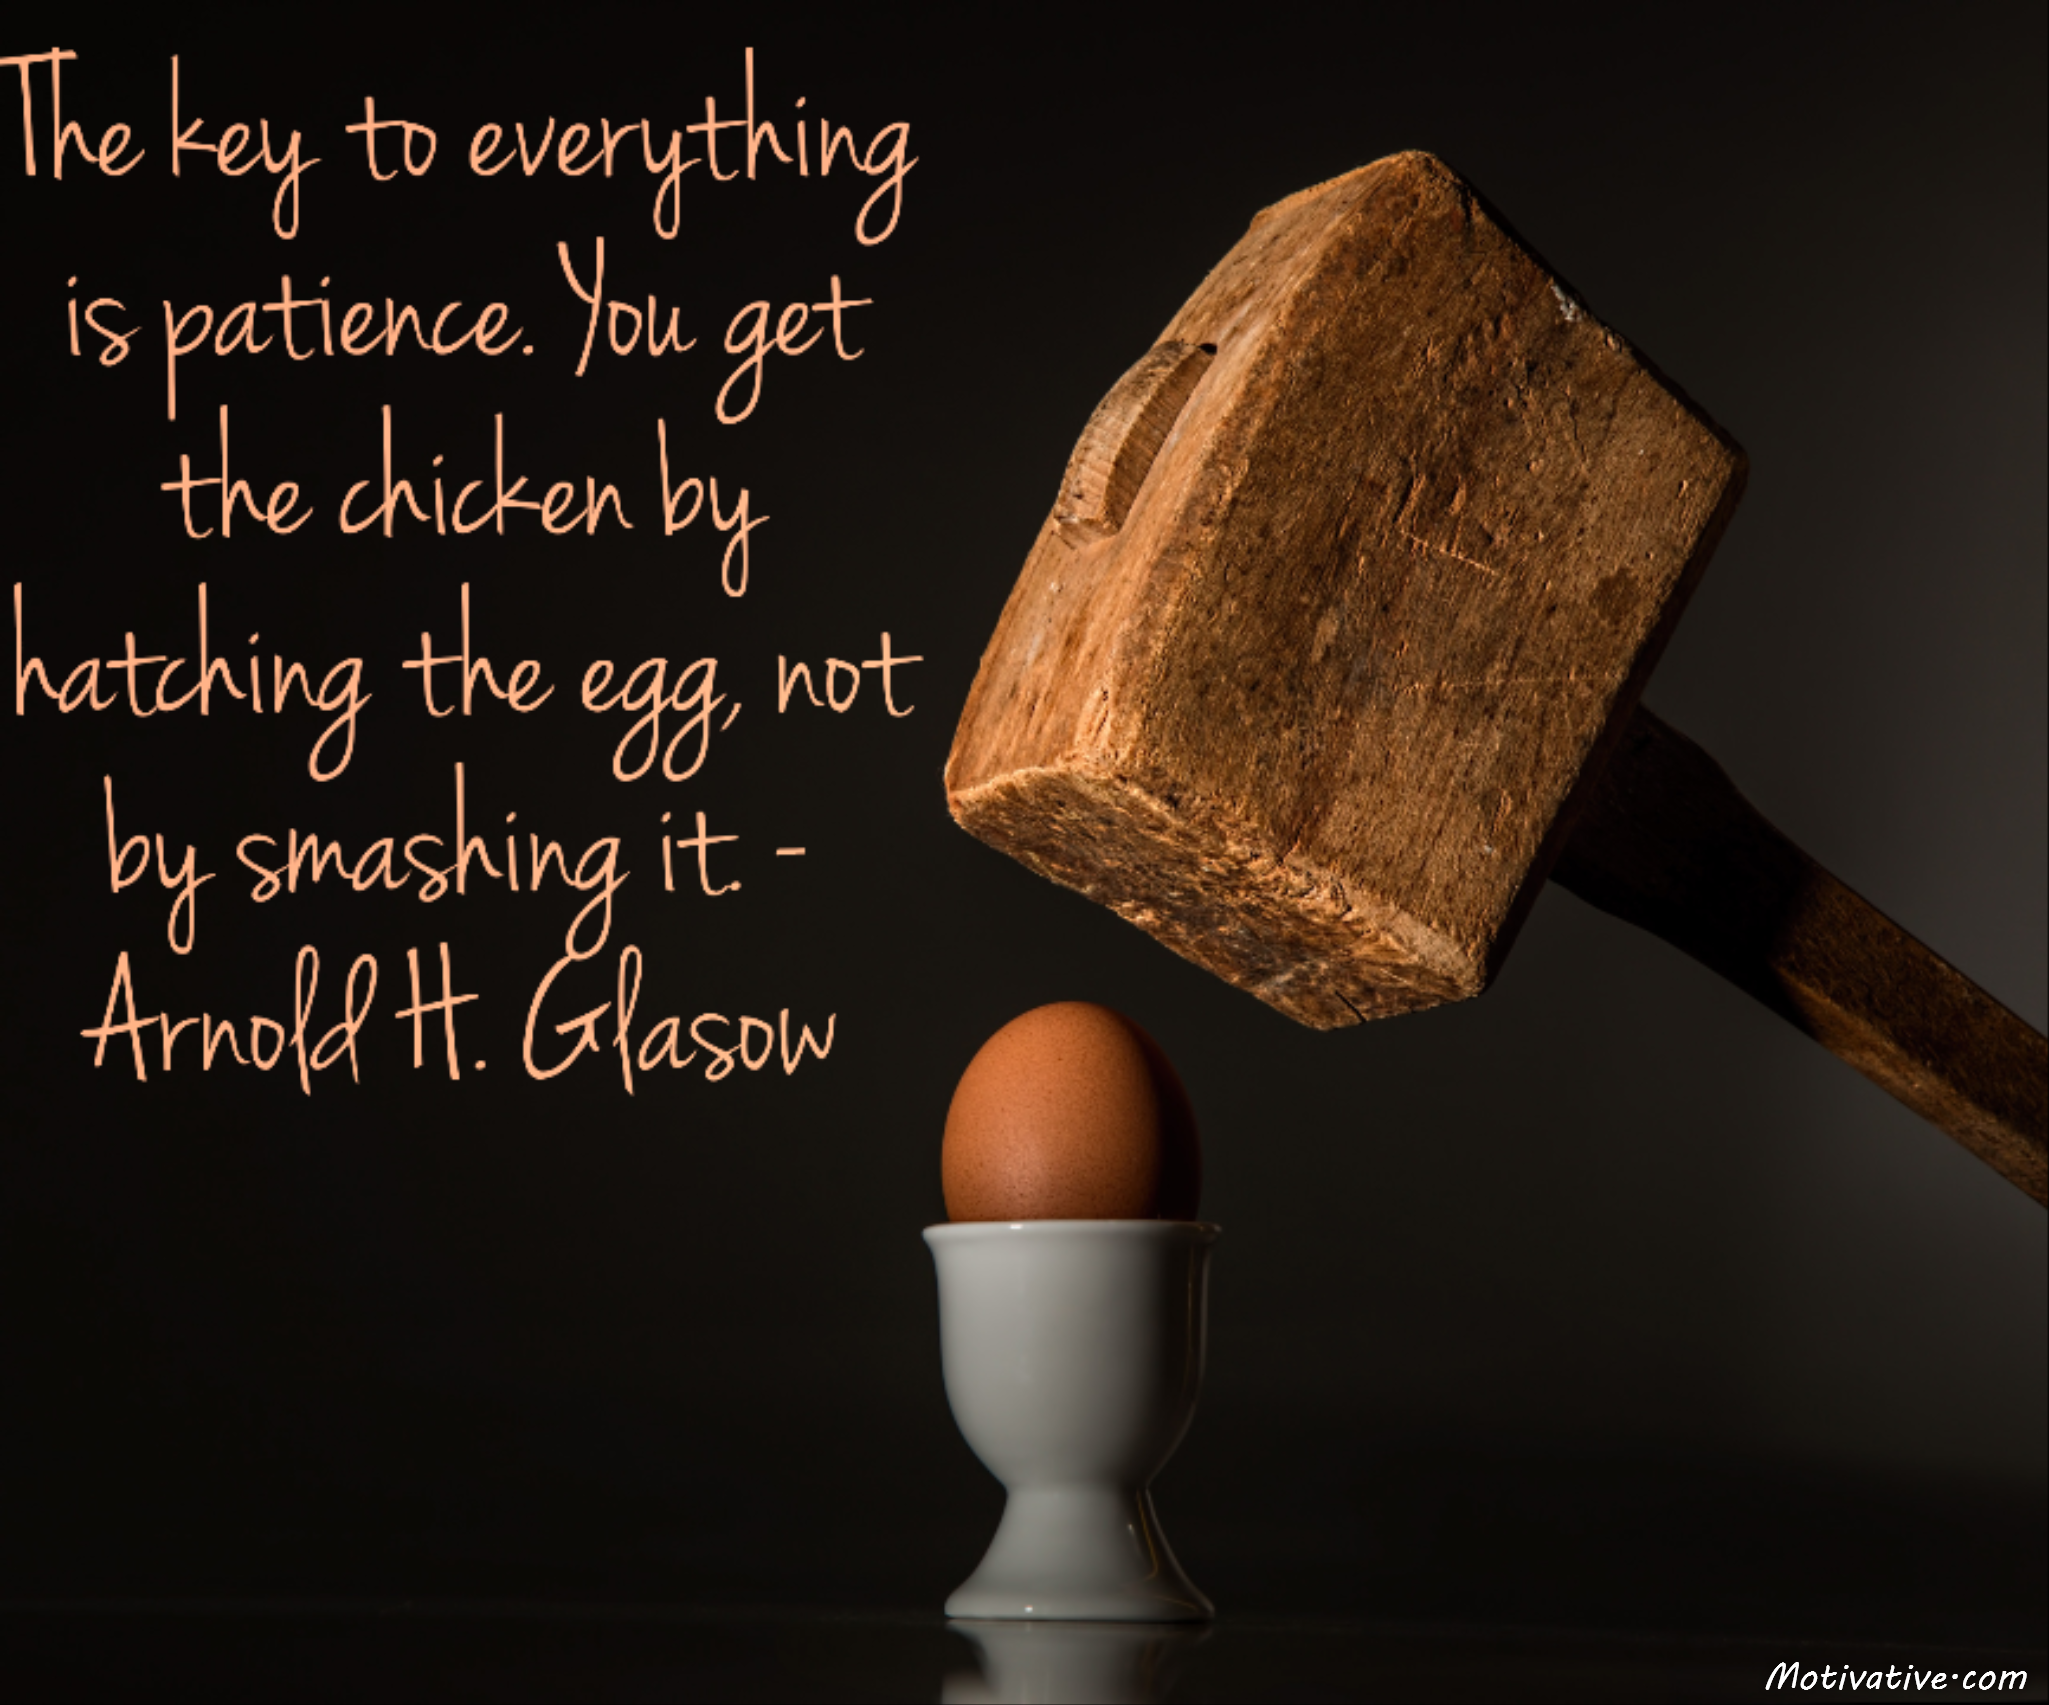 The key to everything is patience. You get the chicken by hatching the egg, not by smashing it. – Arnold H. Glasow